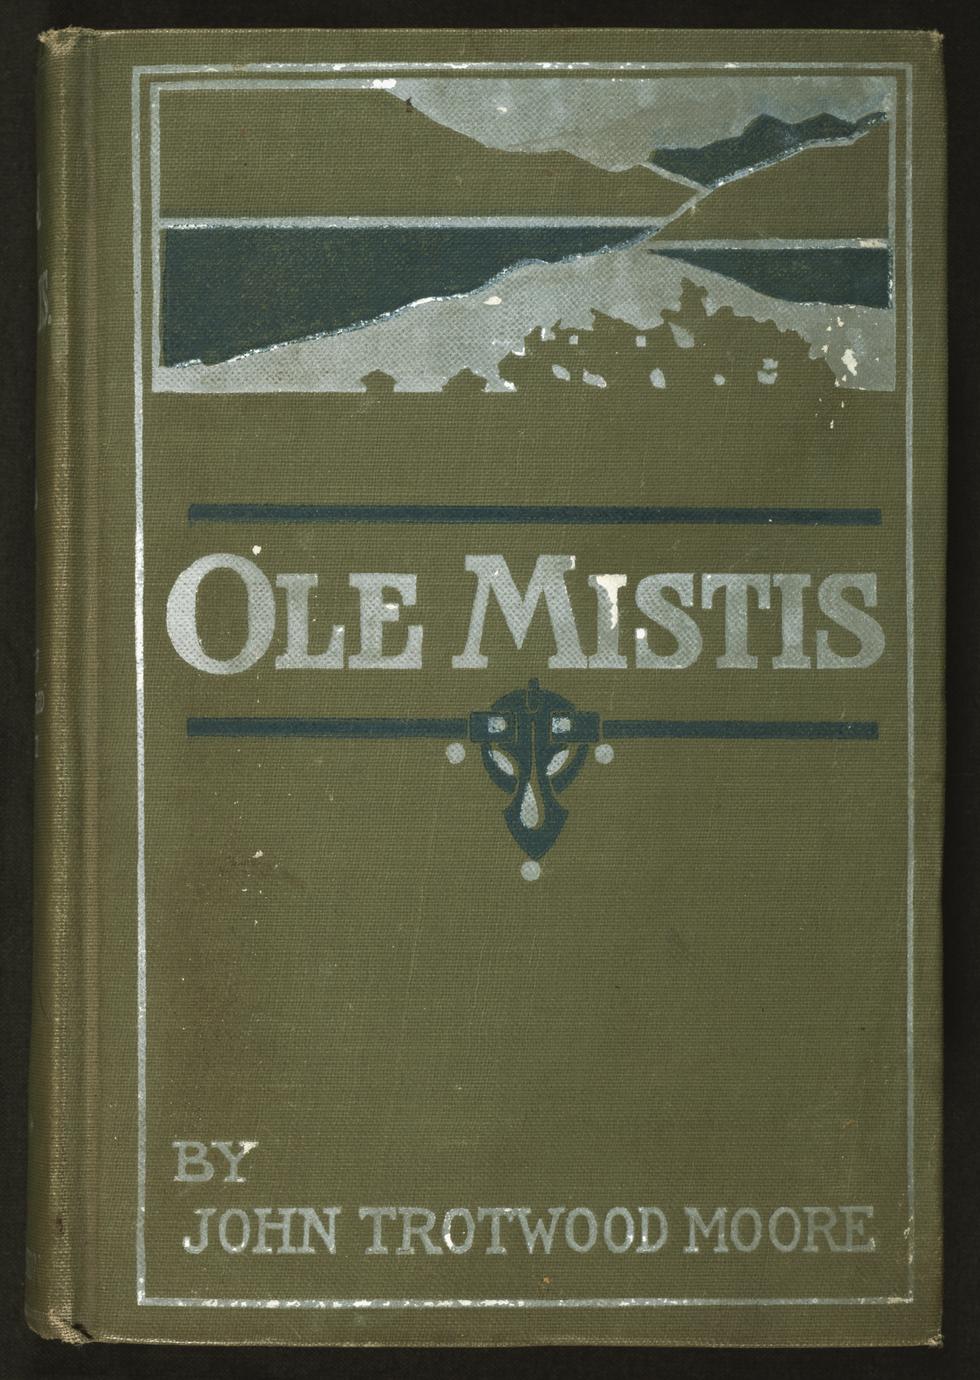 Ole Mistis : and other songs and stories from Tennessee (1 of 2)